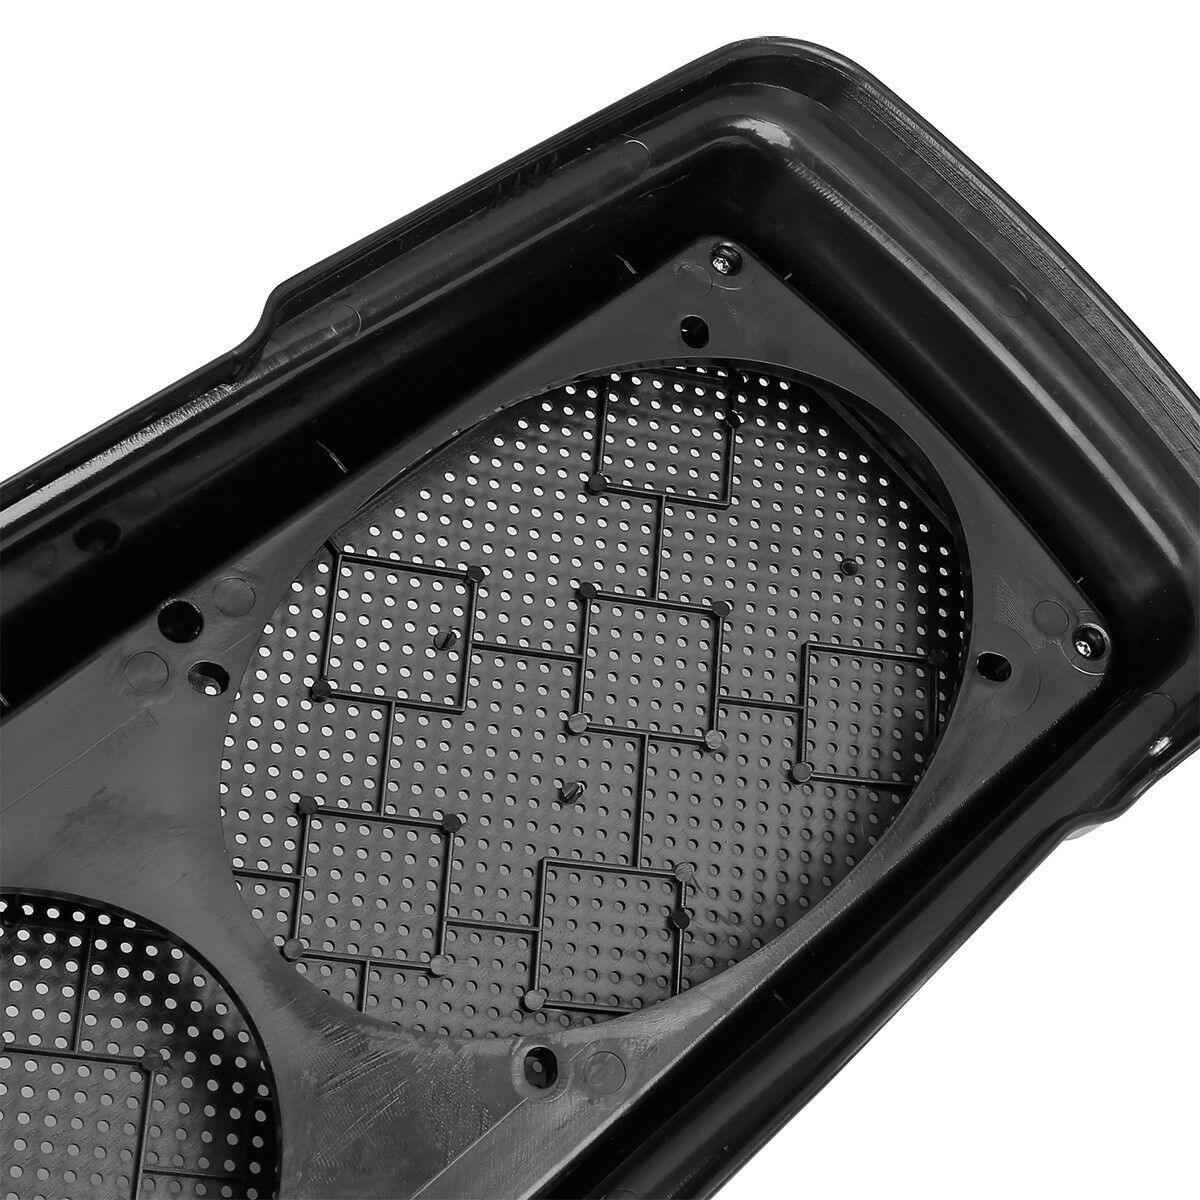 6x9 Saddlebag Dual Speakers Lids For Harley Electra Road King Street Glide 94-13 - Moto Life Products